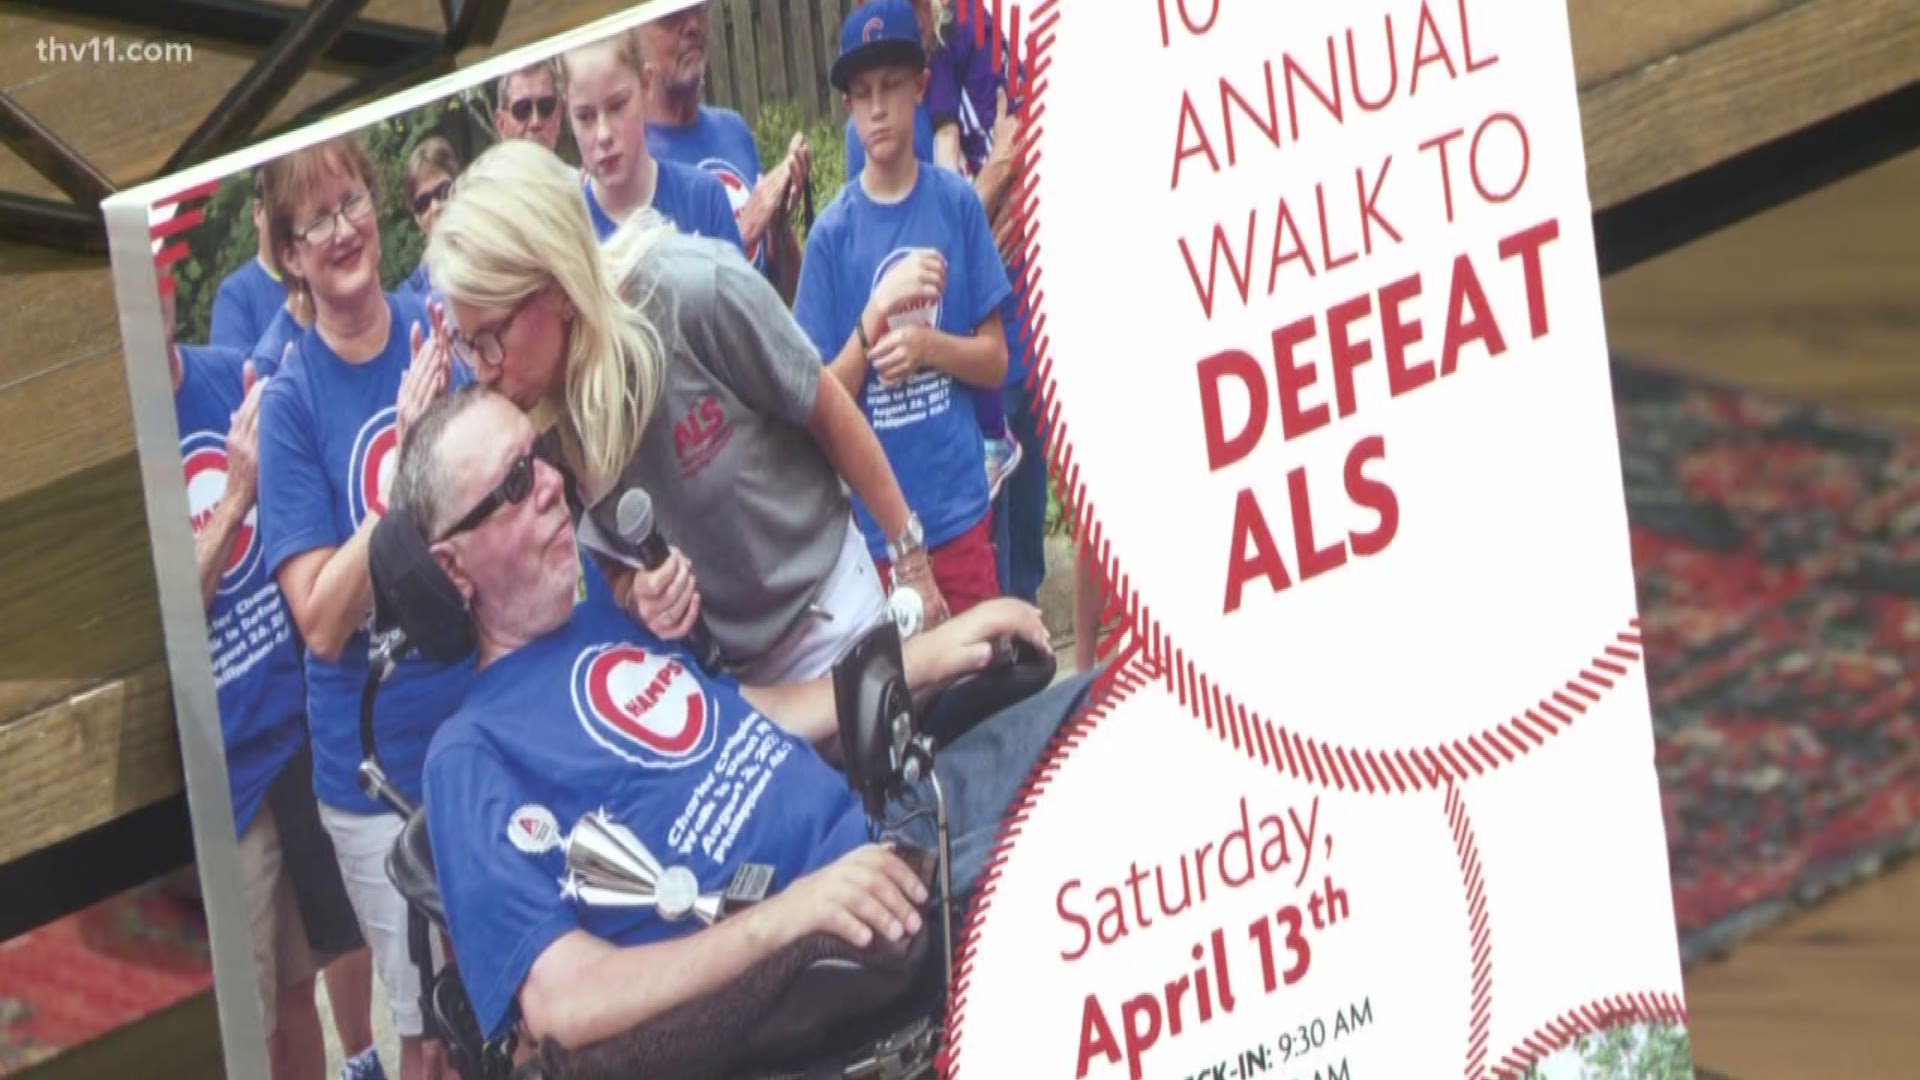 10th Annual Walk To Defeat ALS